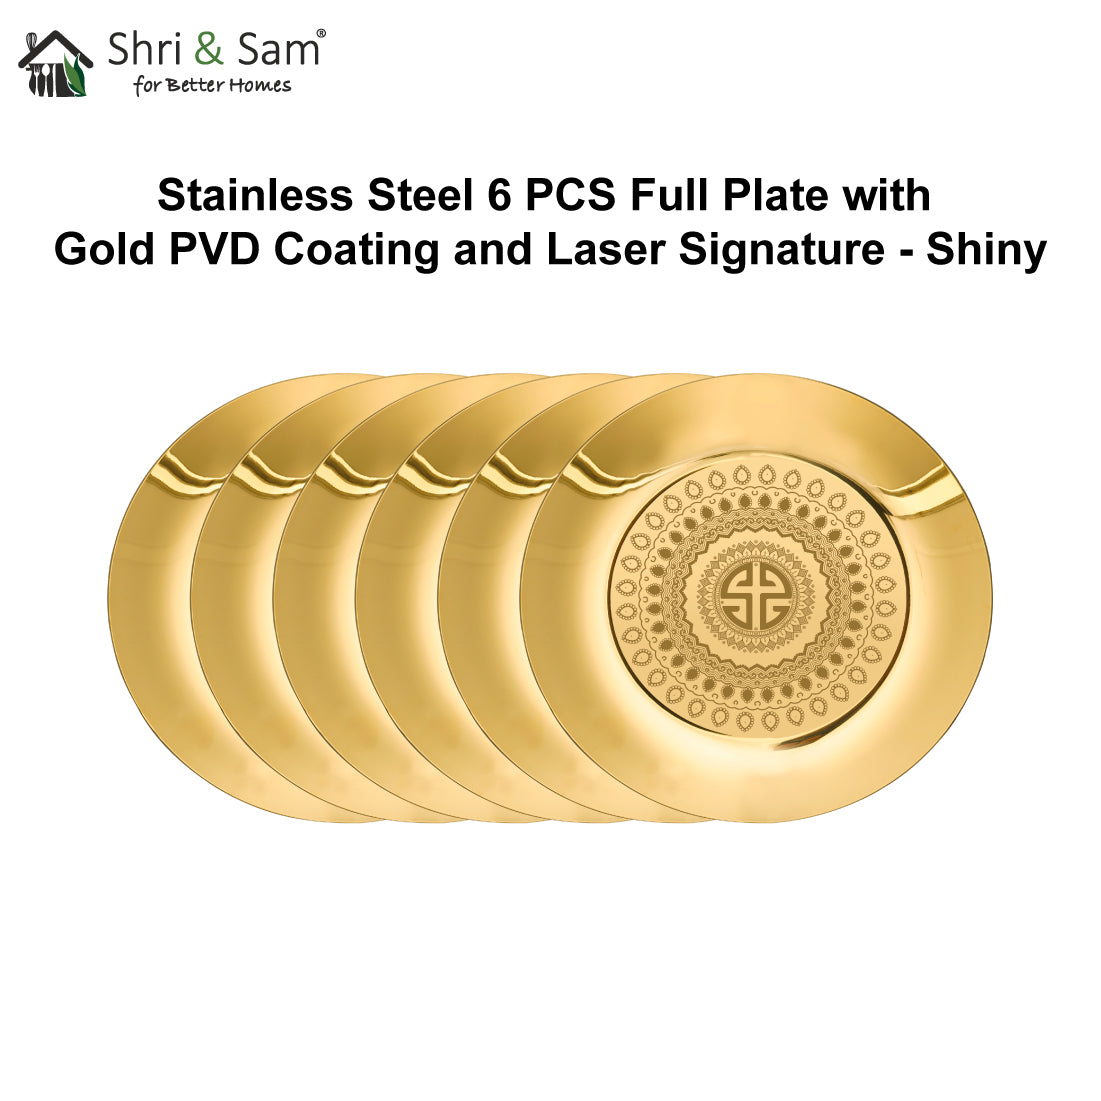 Stainless Steel 6 PCS Full Plate with Gold PVD Coating and Laser Signature - Shiny